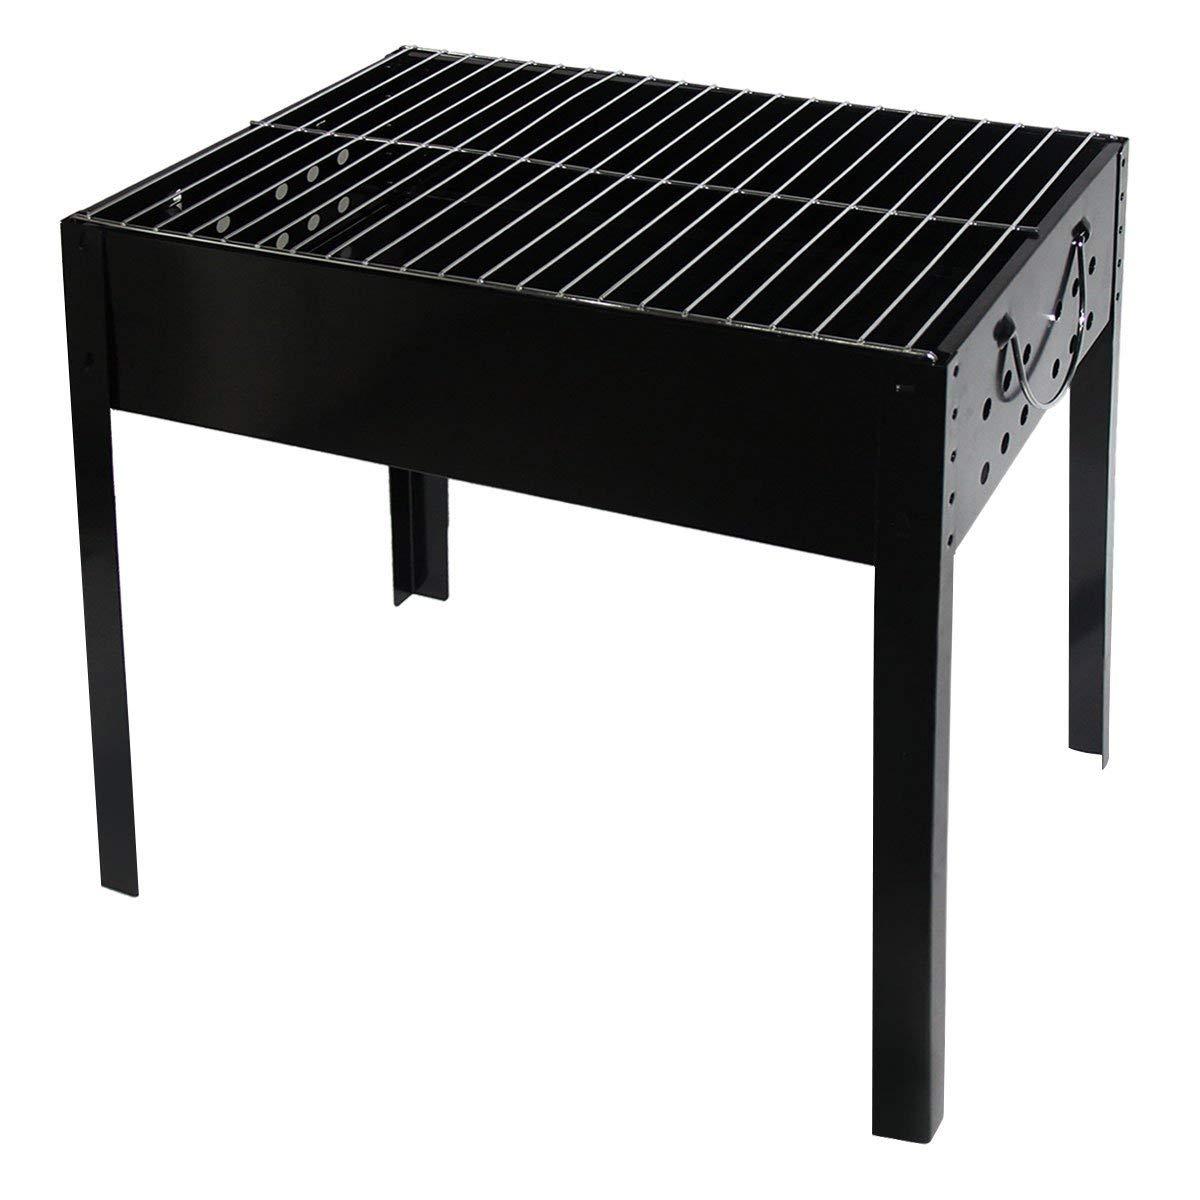 Haide A728 Assembled Barbecue Grill, BBQ Portable Barbecue. $57.49 ERV